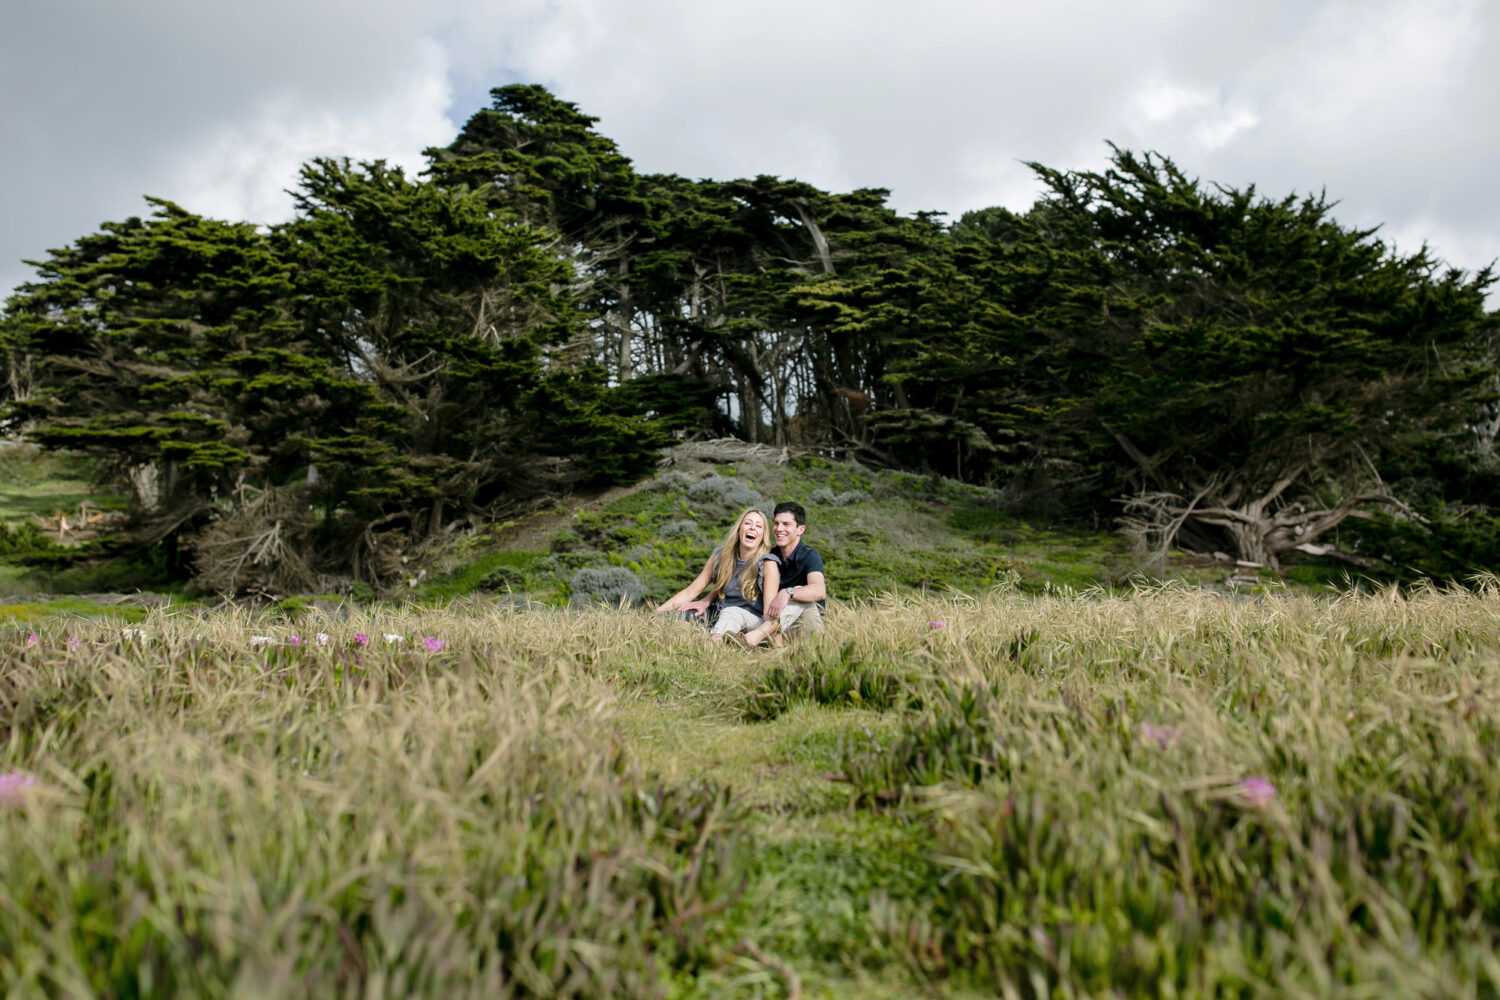 A wide-angle view of a seated couple during an engagement photoshoot in a meadow with Cypress trees in the background.